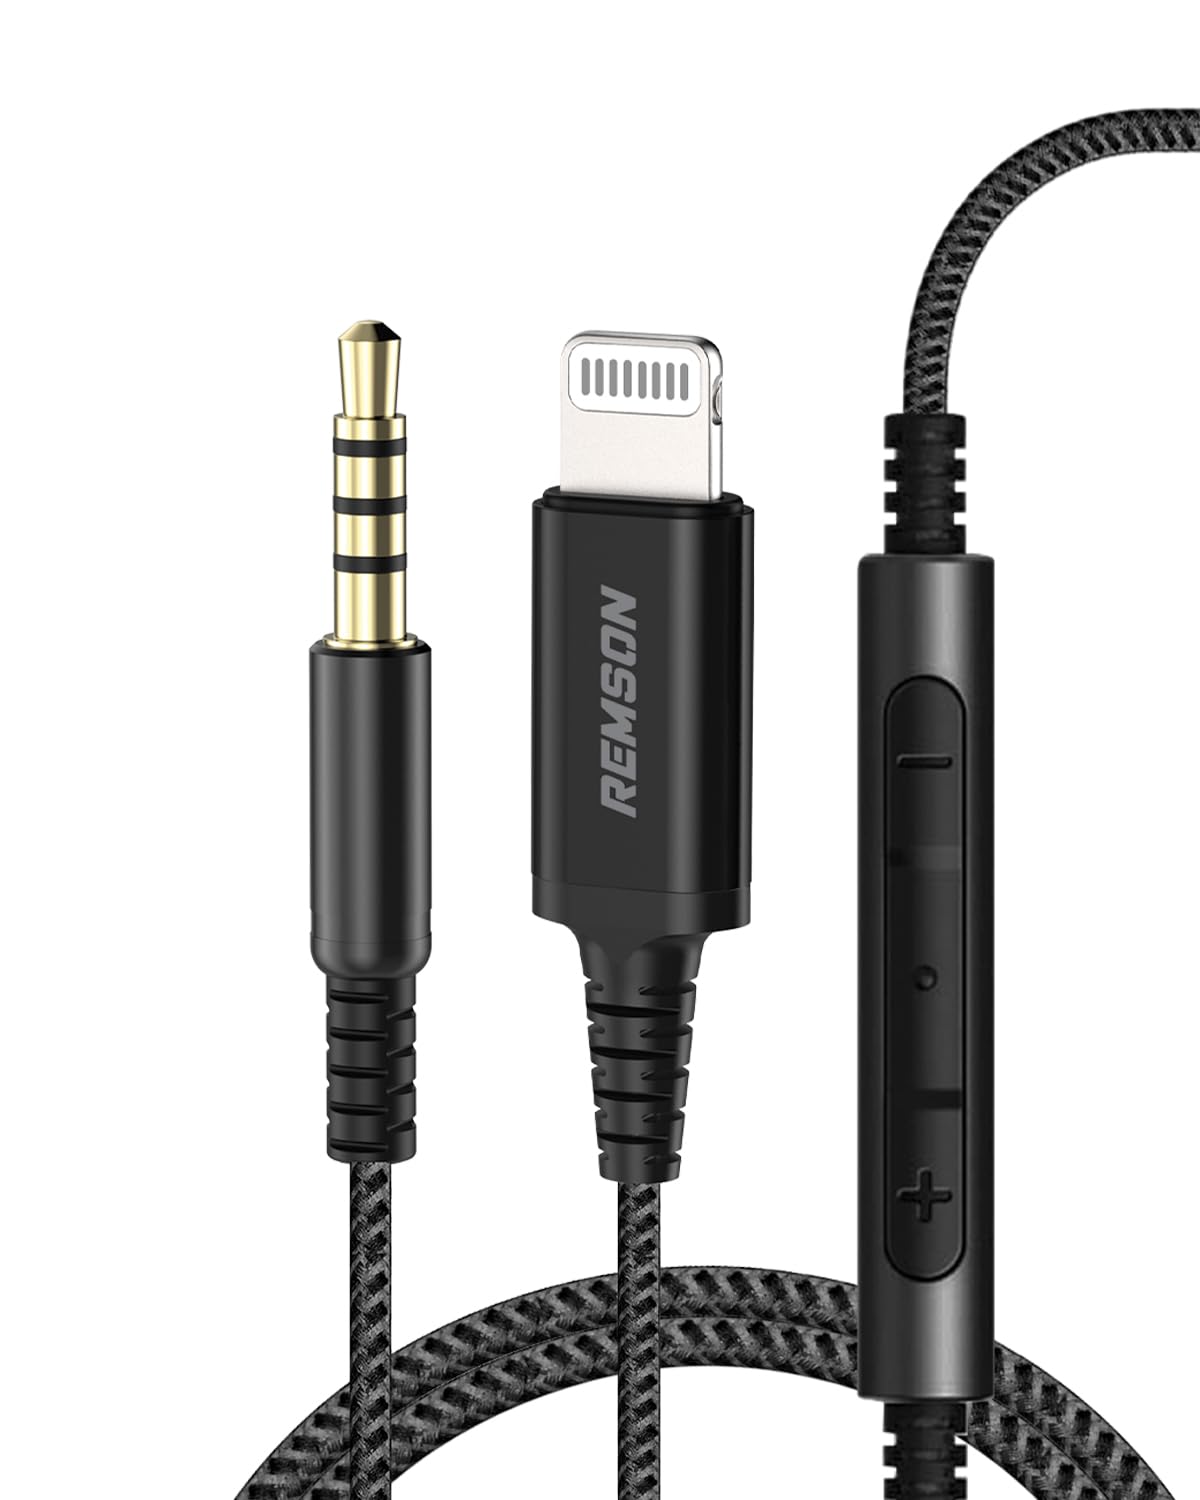 [Apple MFi Certified] Remson Lightning to 3.5 mm AUX Cable 1.2M Home Car Stereo Speaker Headphone Jack Adapter Audio Cable - Black